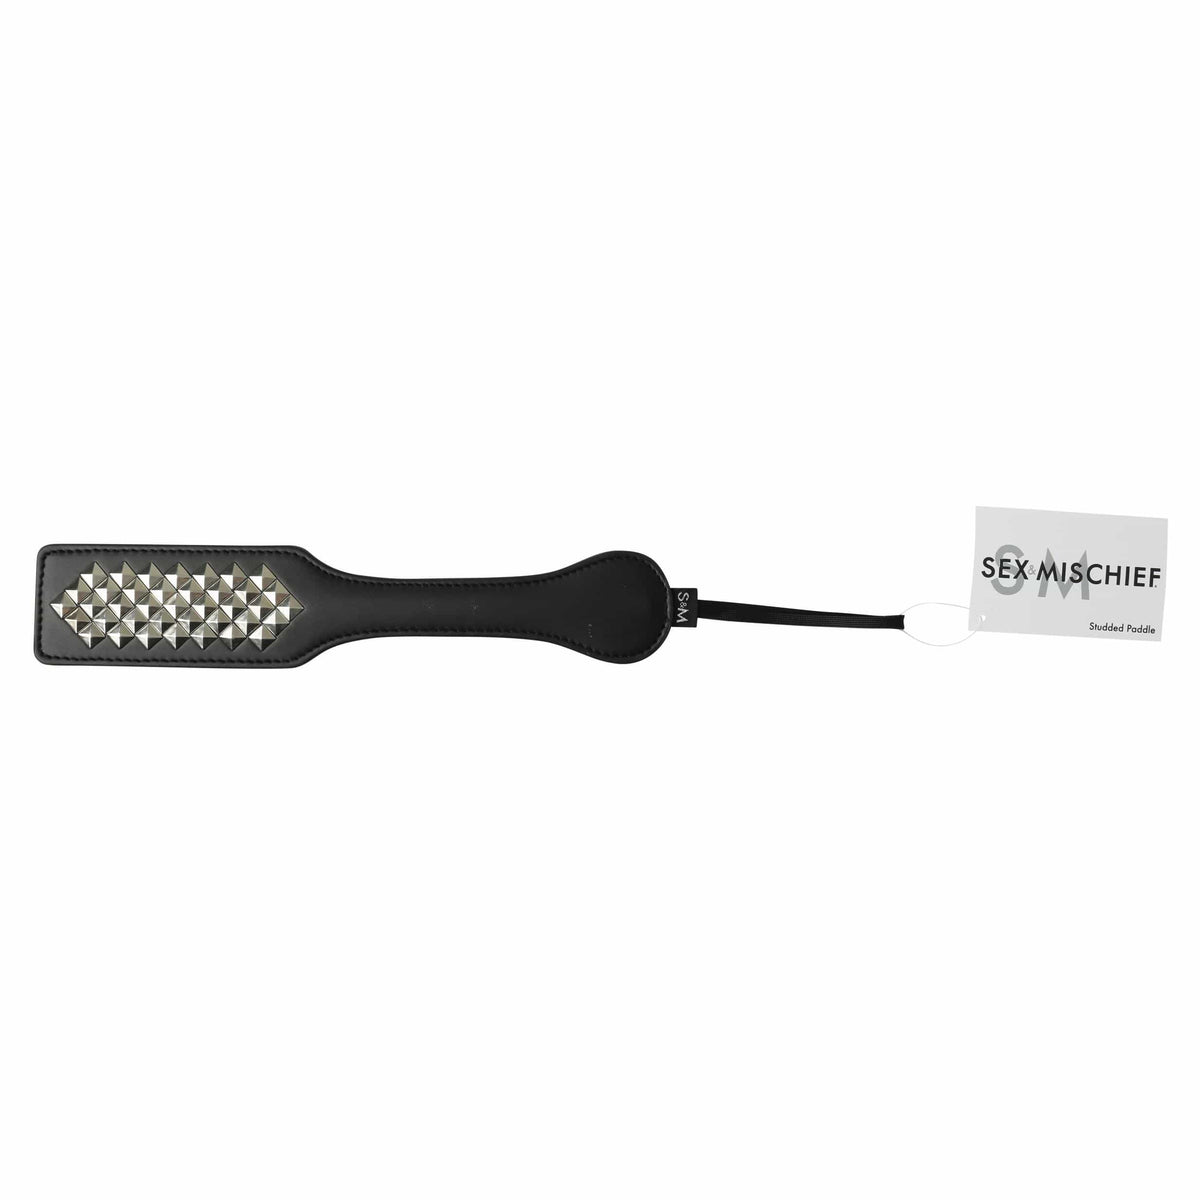 sex and mischief studded paddle black